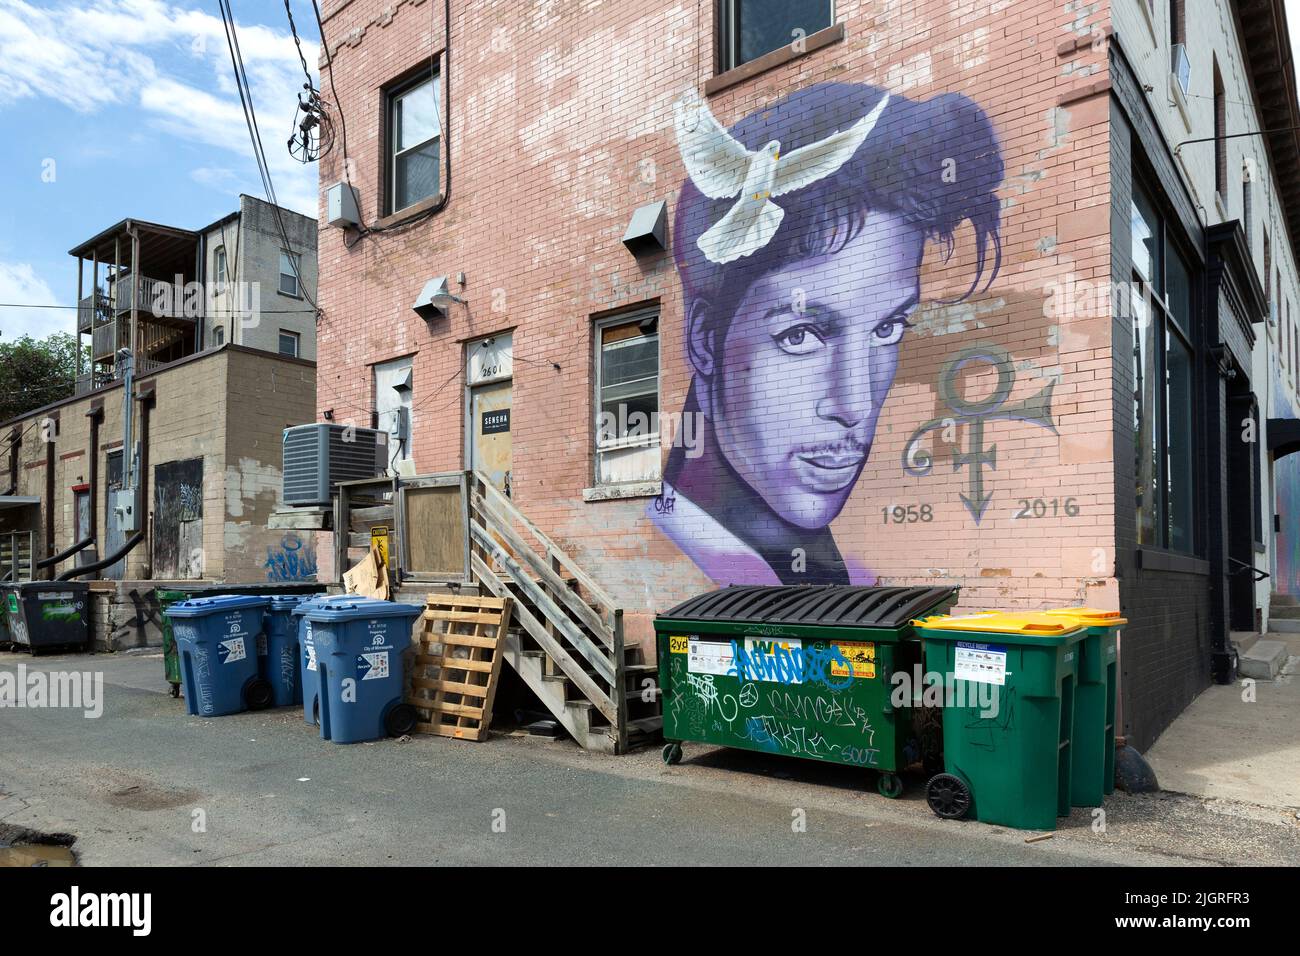 Spray painted mural portrait of American singer, songwriter, musician, record producer, dancer, and actor Prince in Uptown Minneapolis, Minnesota. Stock Photo